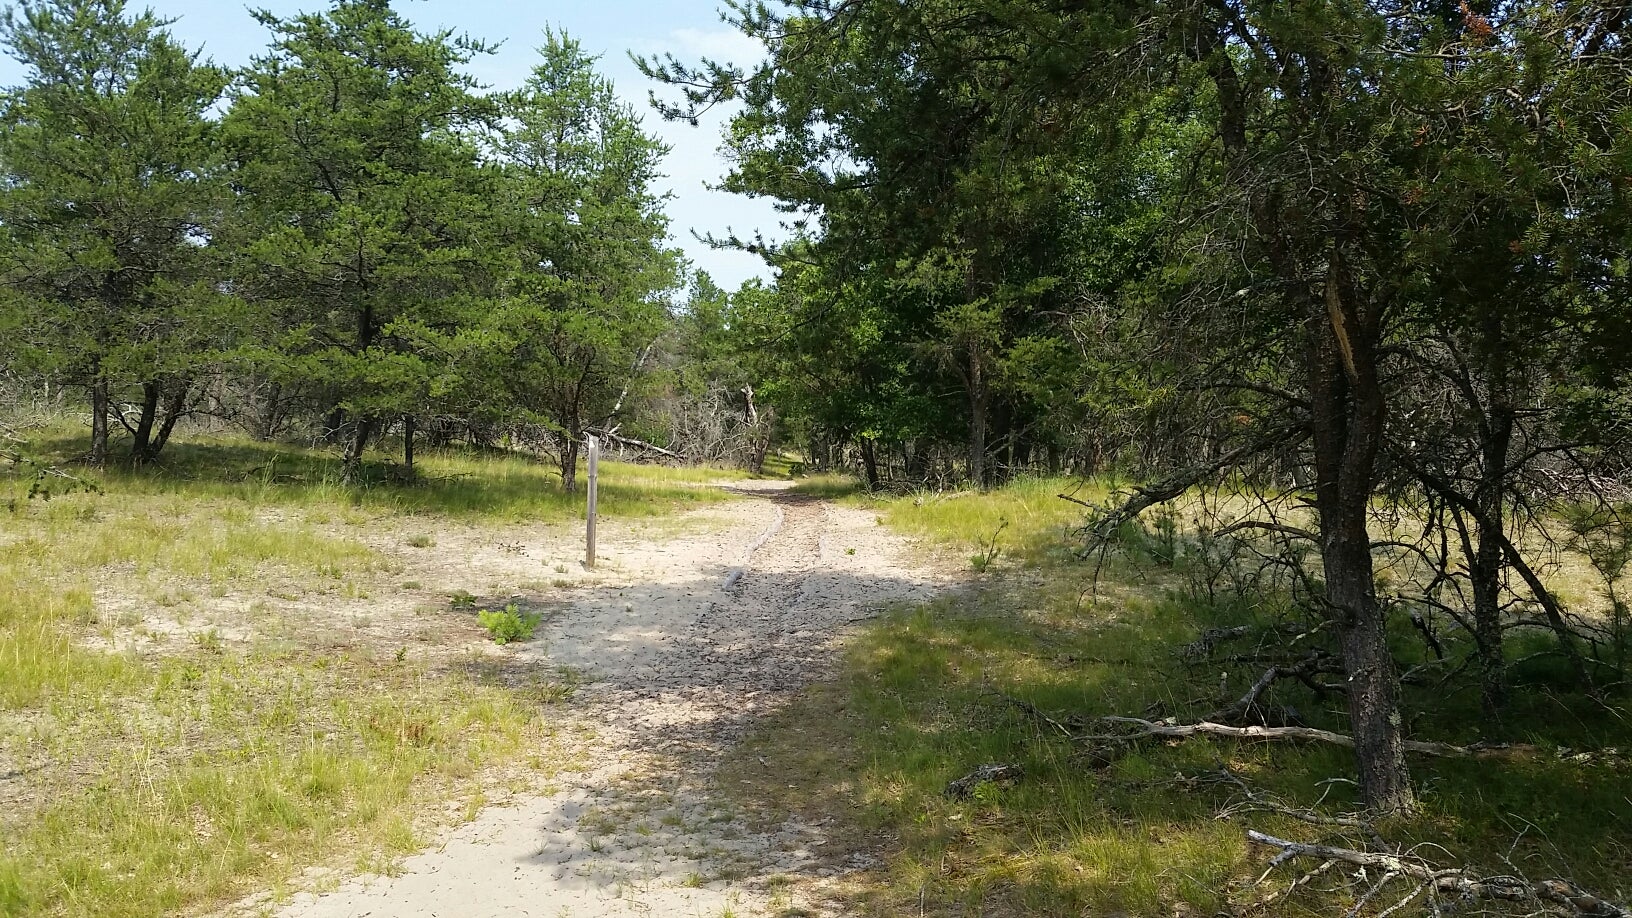 The trail in